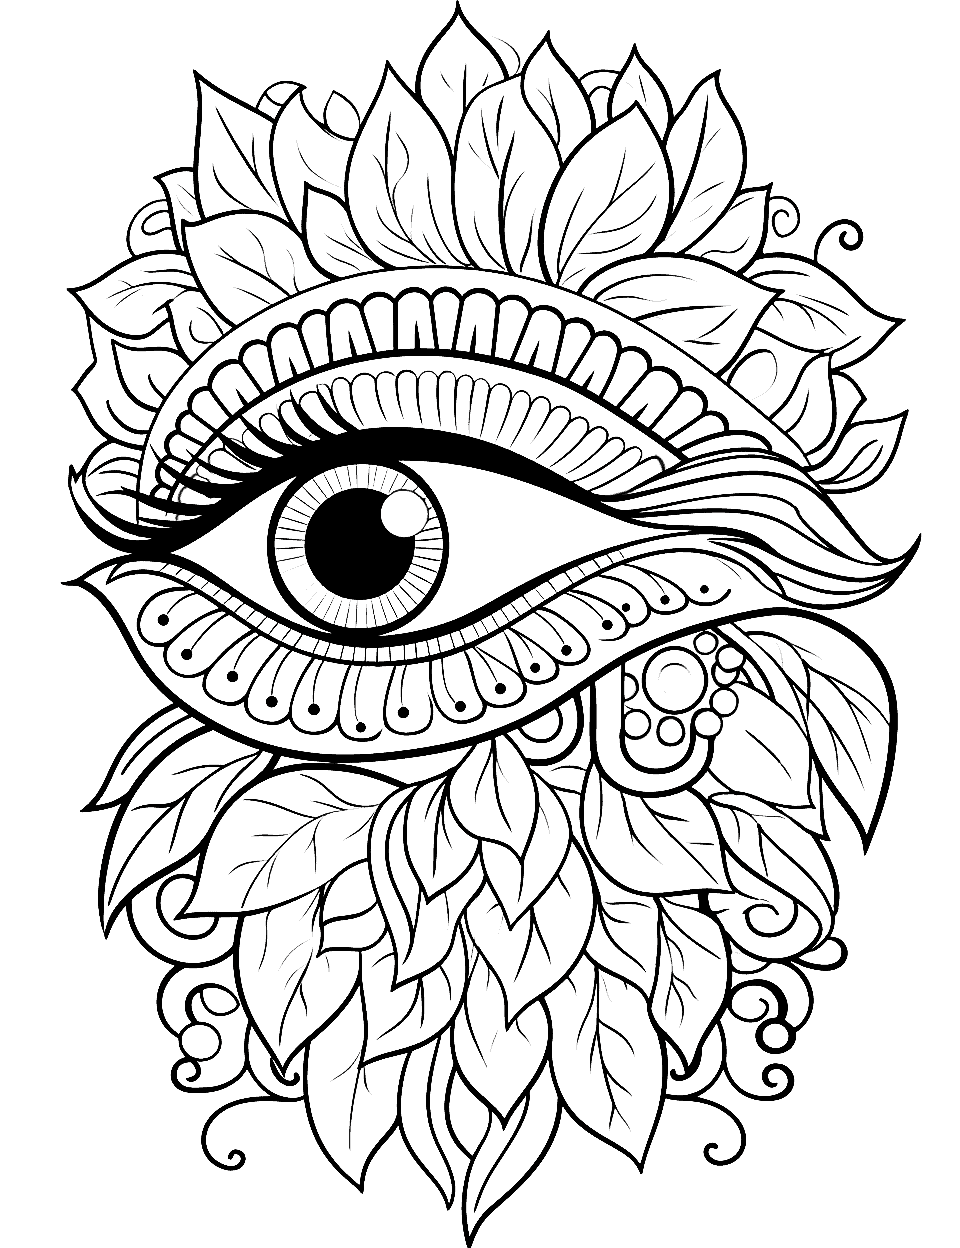 Eye Design Adult Coloring Page - An intricate eye design inspired by trending Pinterest patterns, filled with detailed elements and patterns.